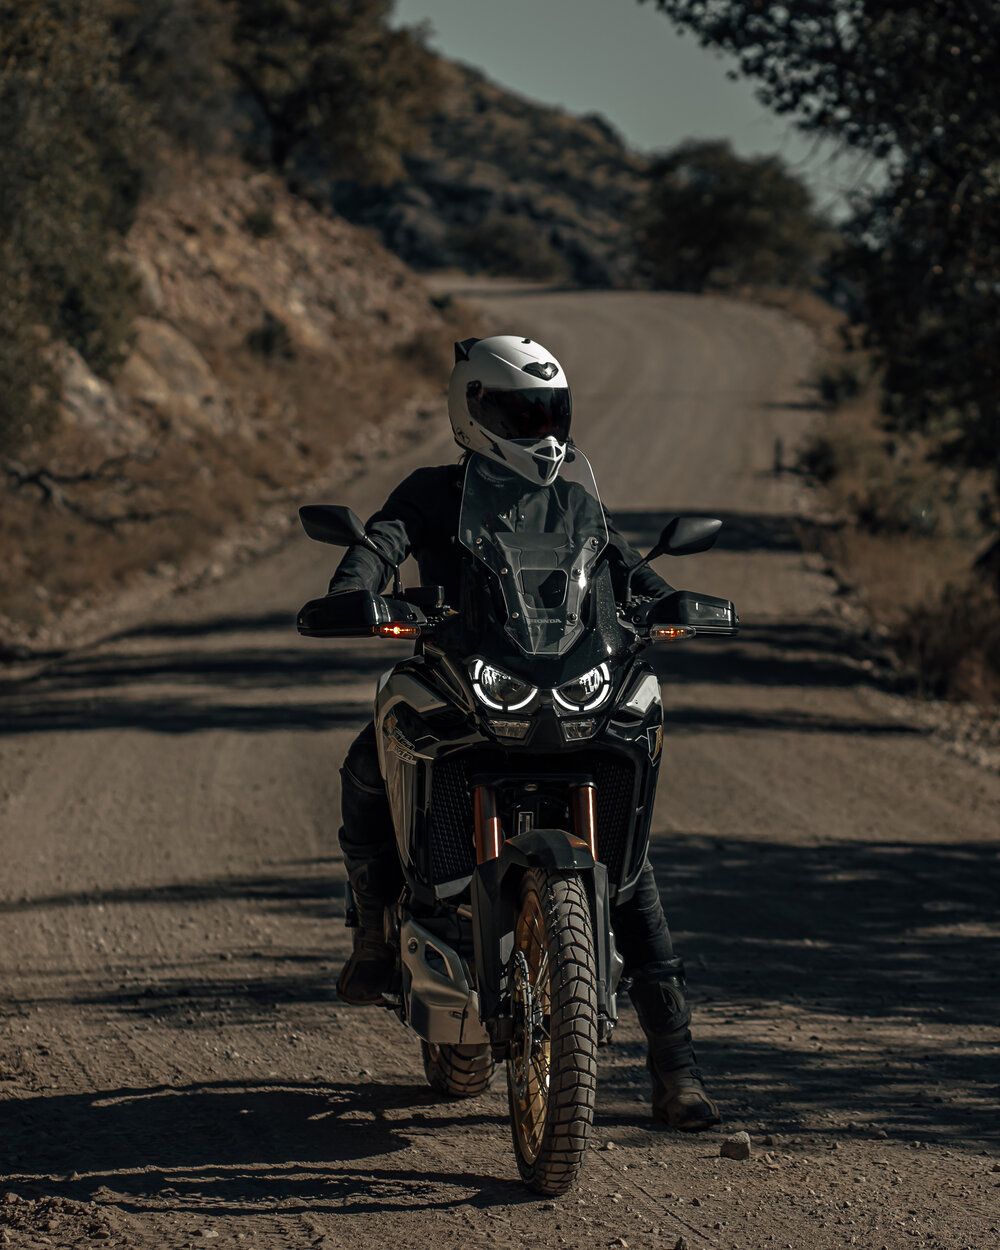 The 2022 Honda Africa Twin's Front View